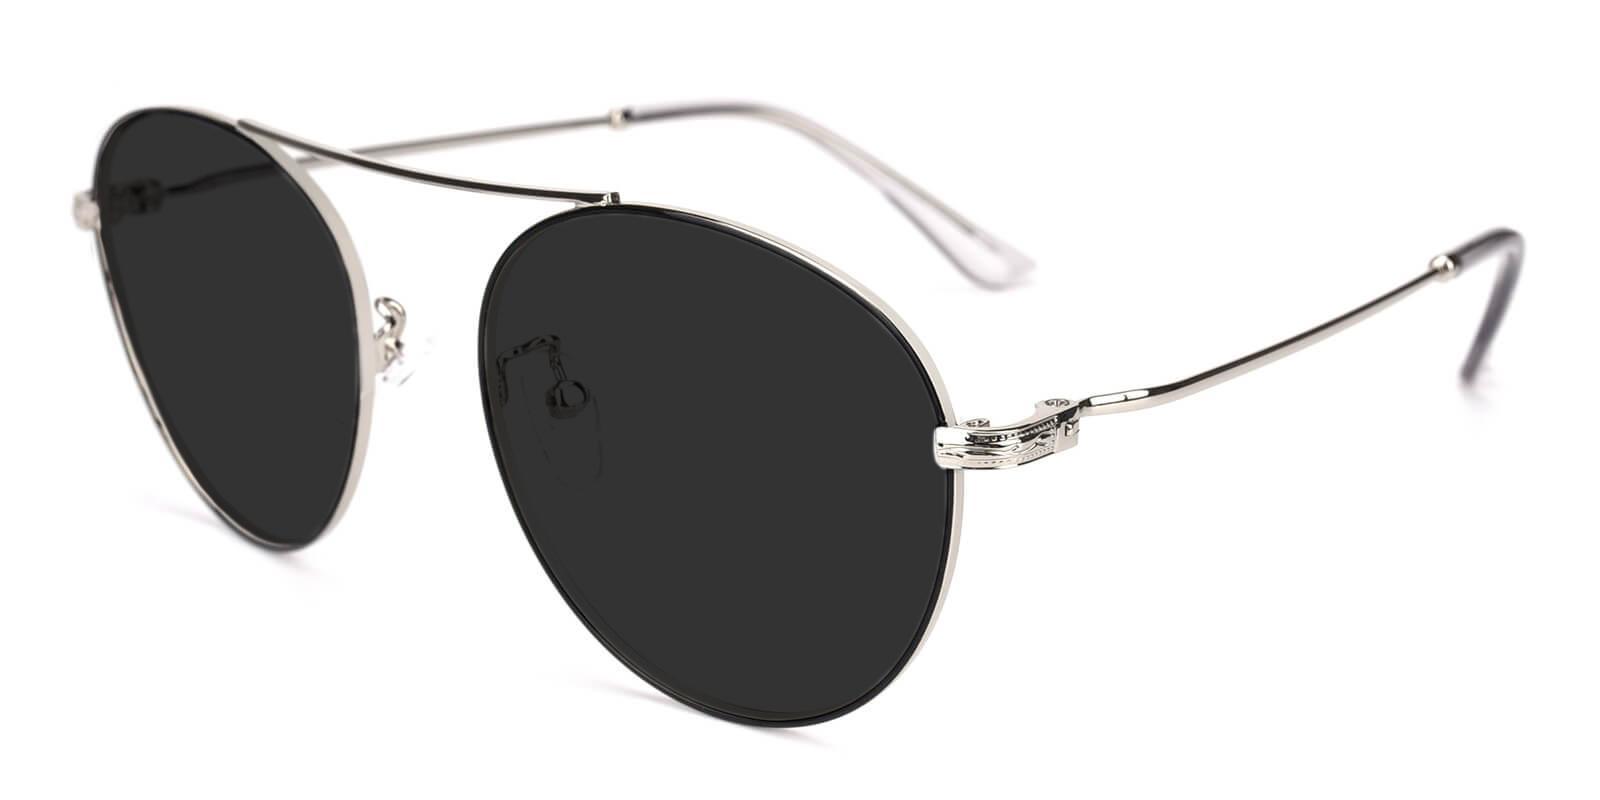 Cupertino Silver Metal NosePads , Sunglasses Frames from ABBE Glasses